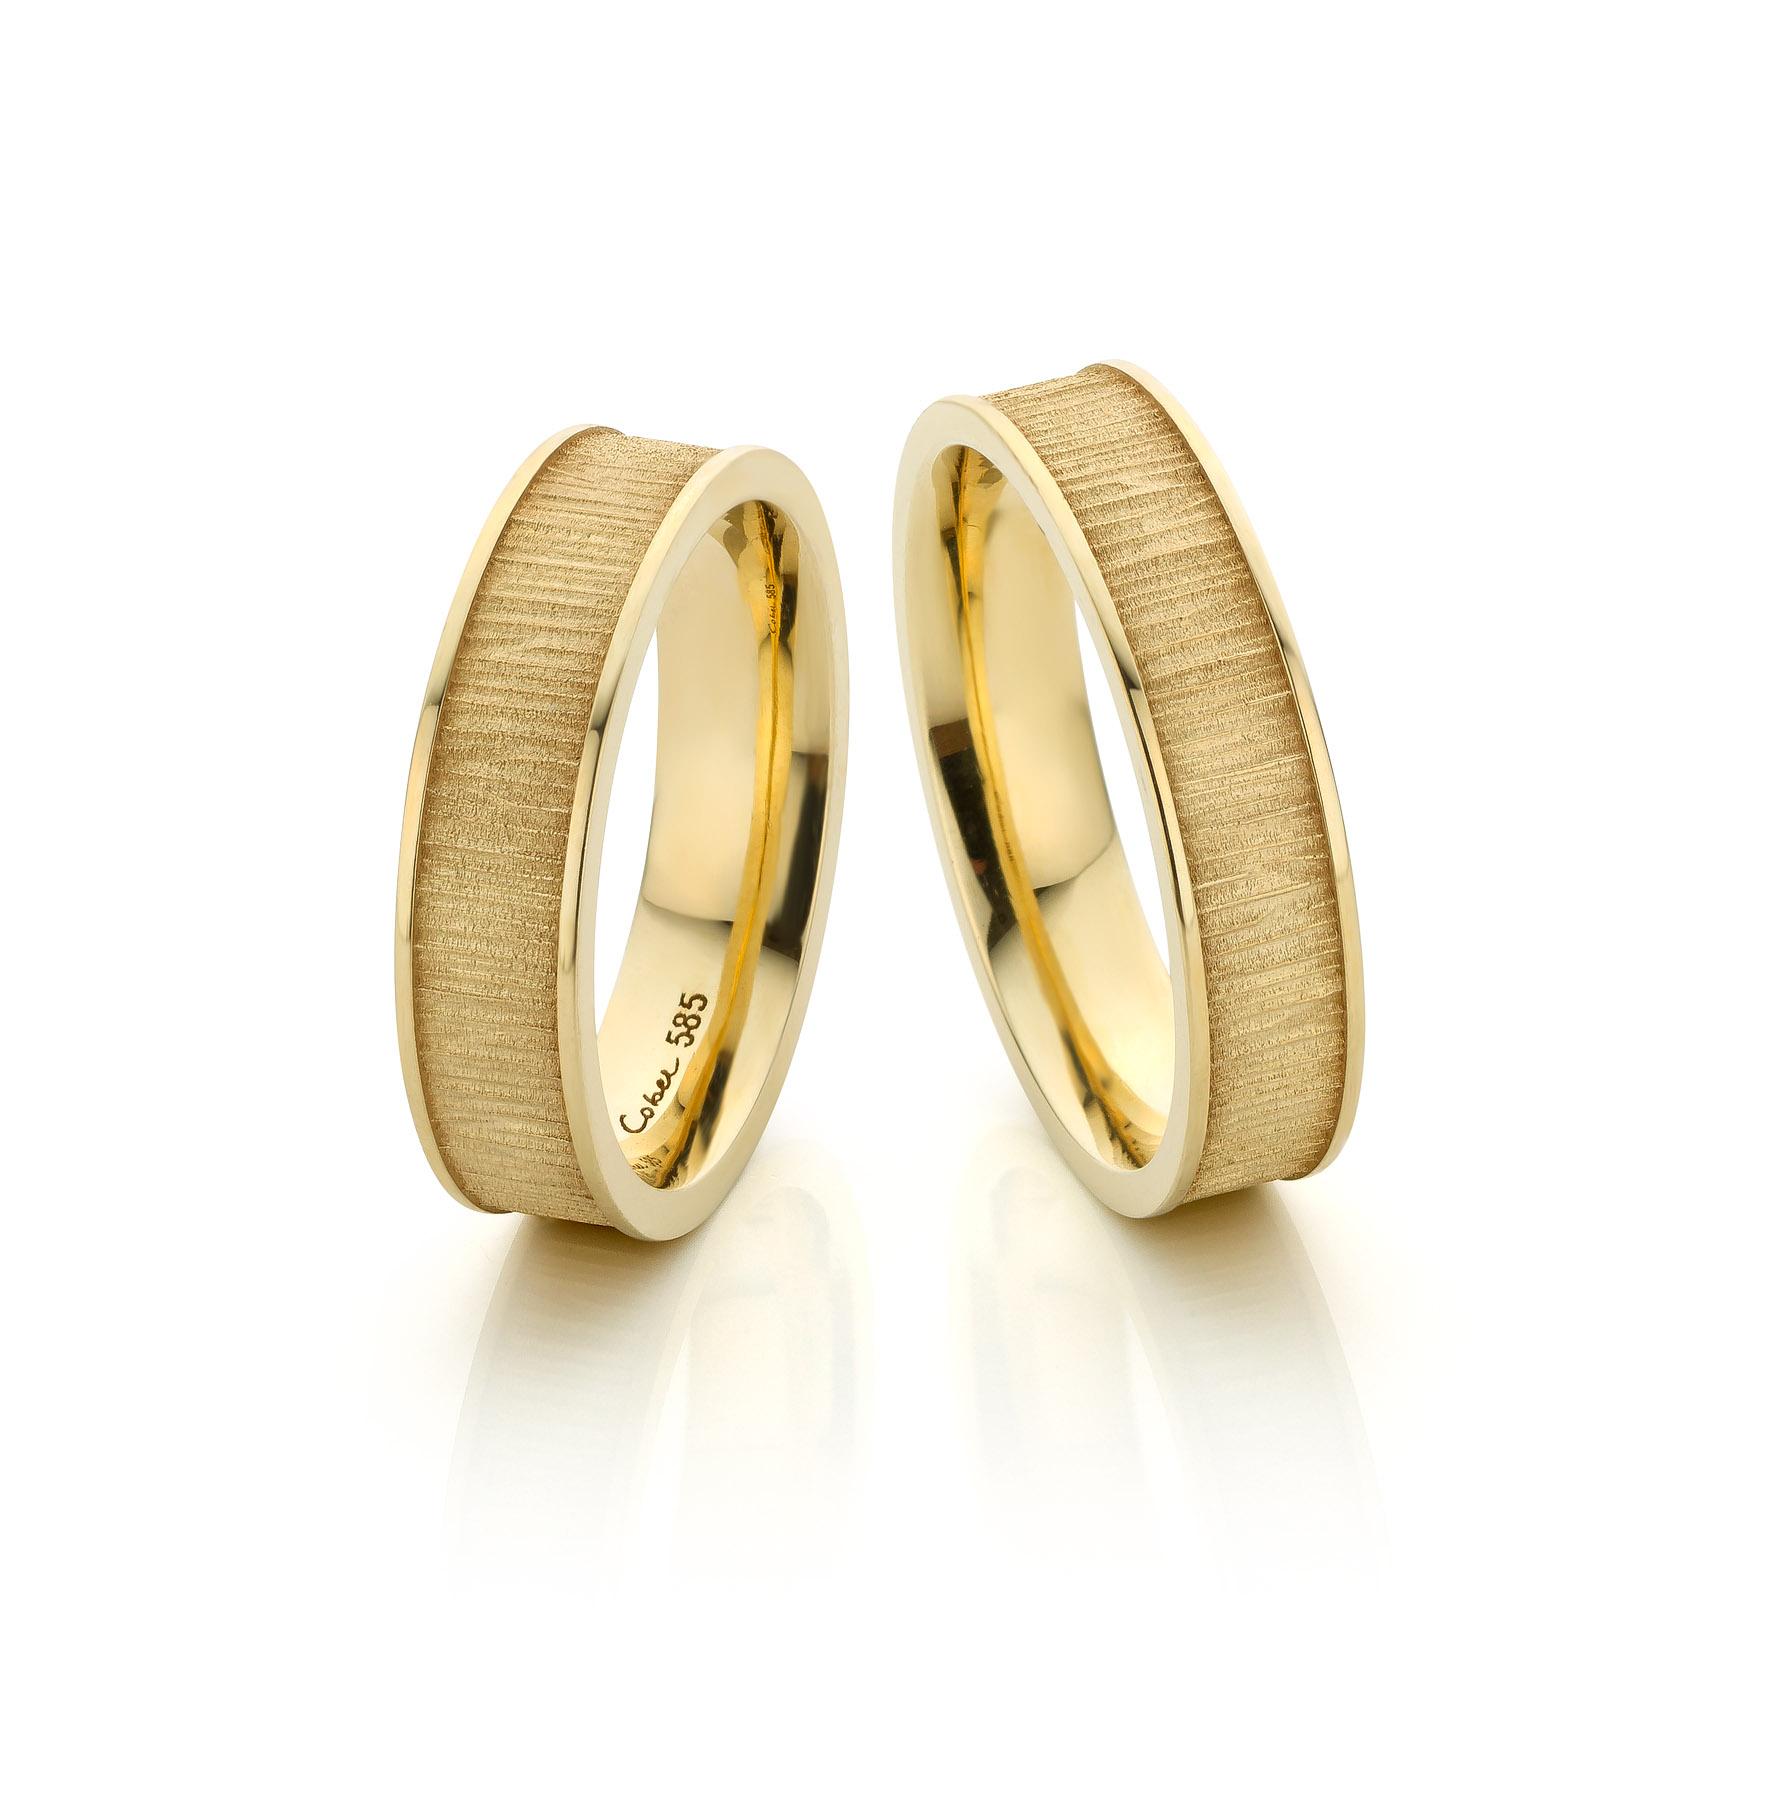 For Sale:  Cober Jewellery “Eternal Forest” Yellow Gold Wedding Bands Rings 3